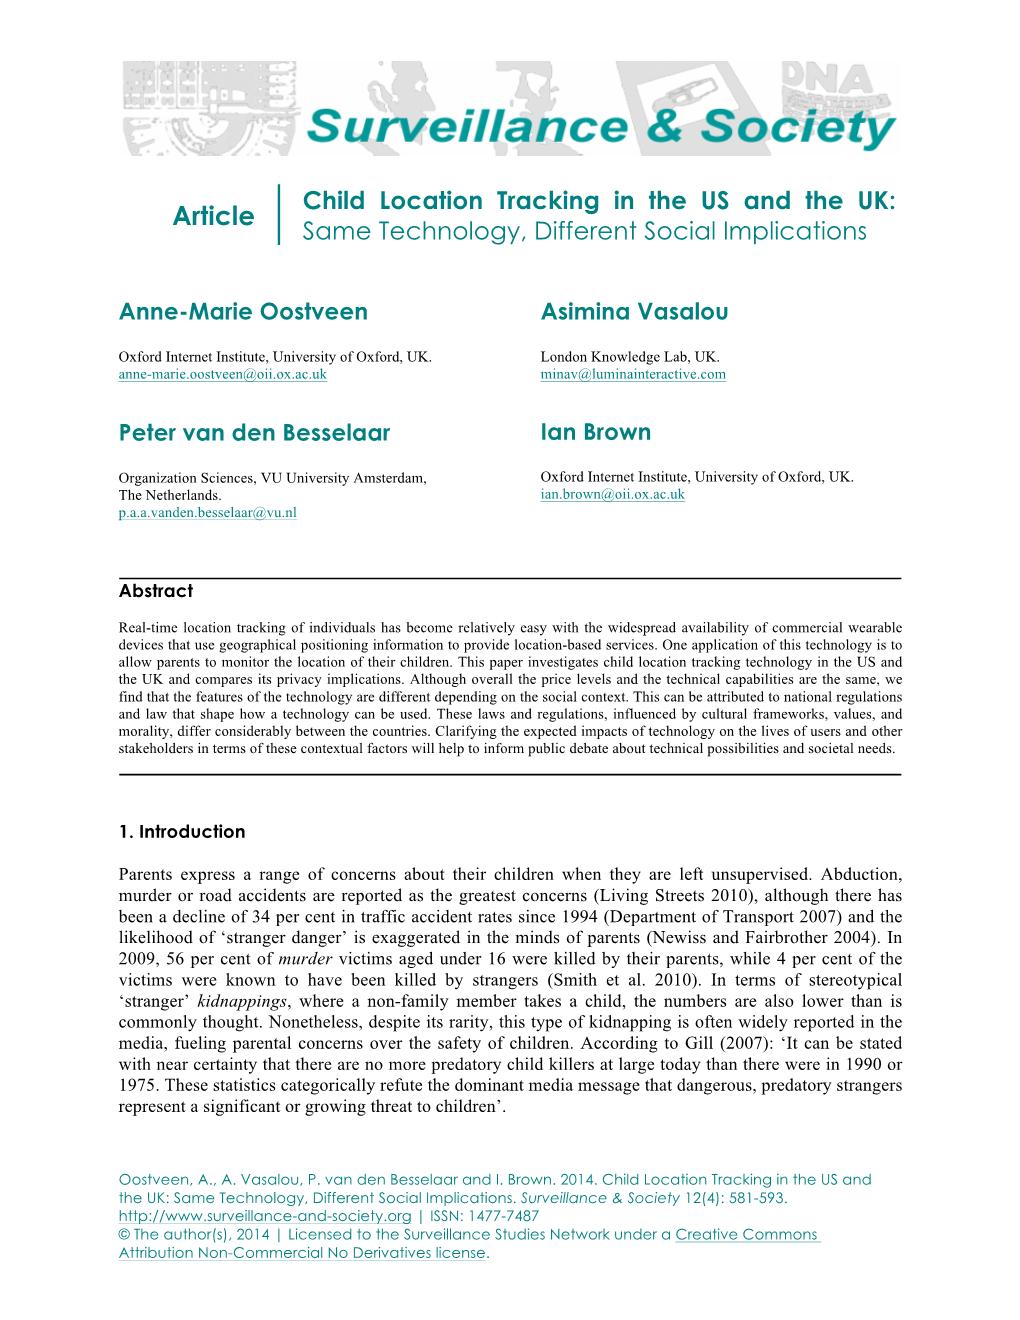 Child Location Tracking in the US and the UK: Article Same Technology, Different Social Implications